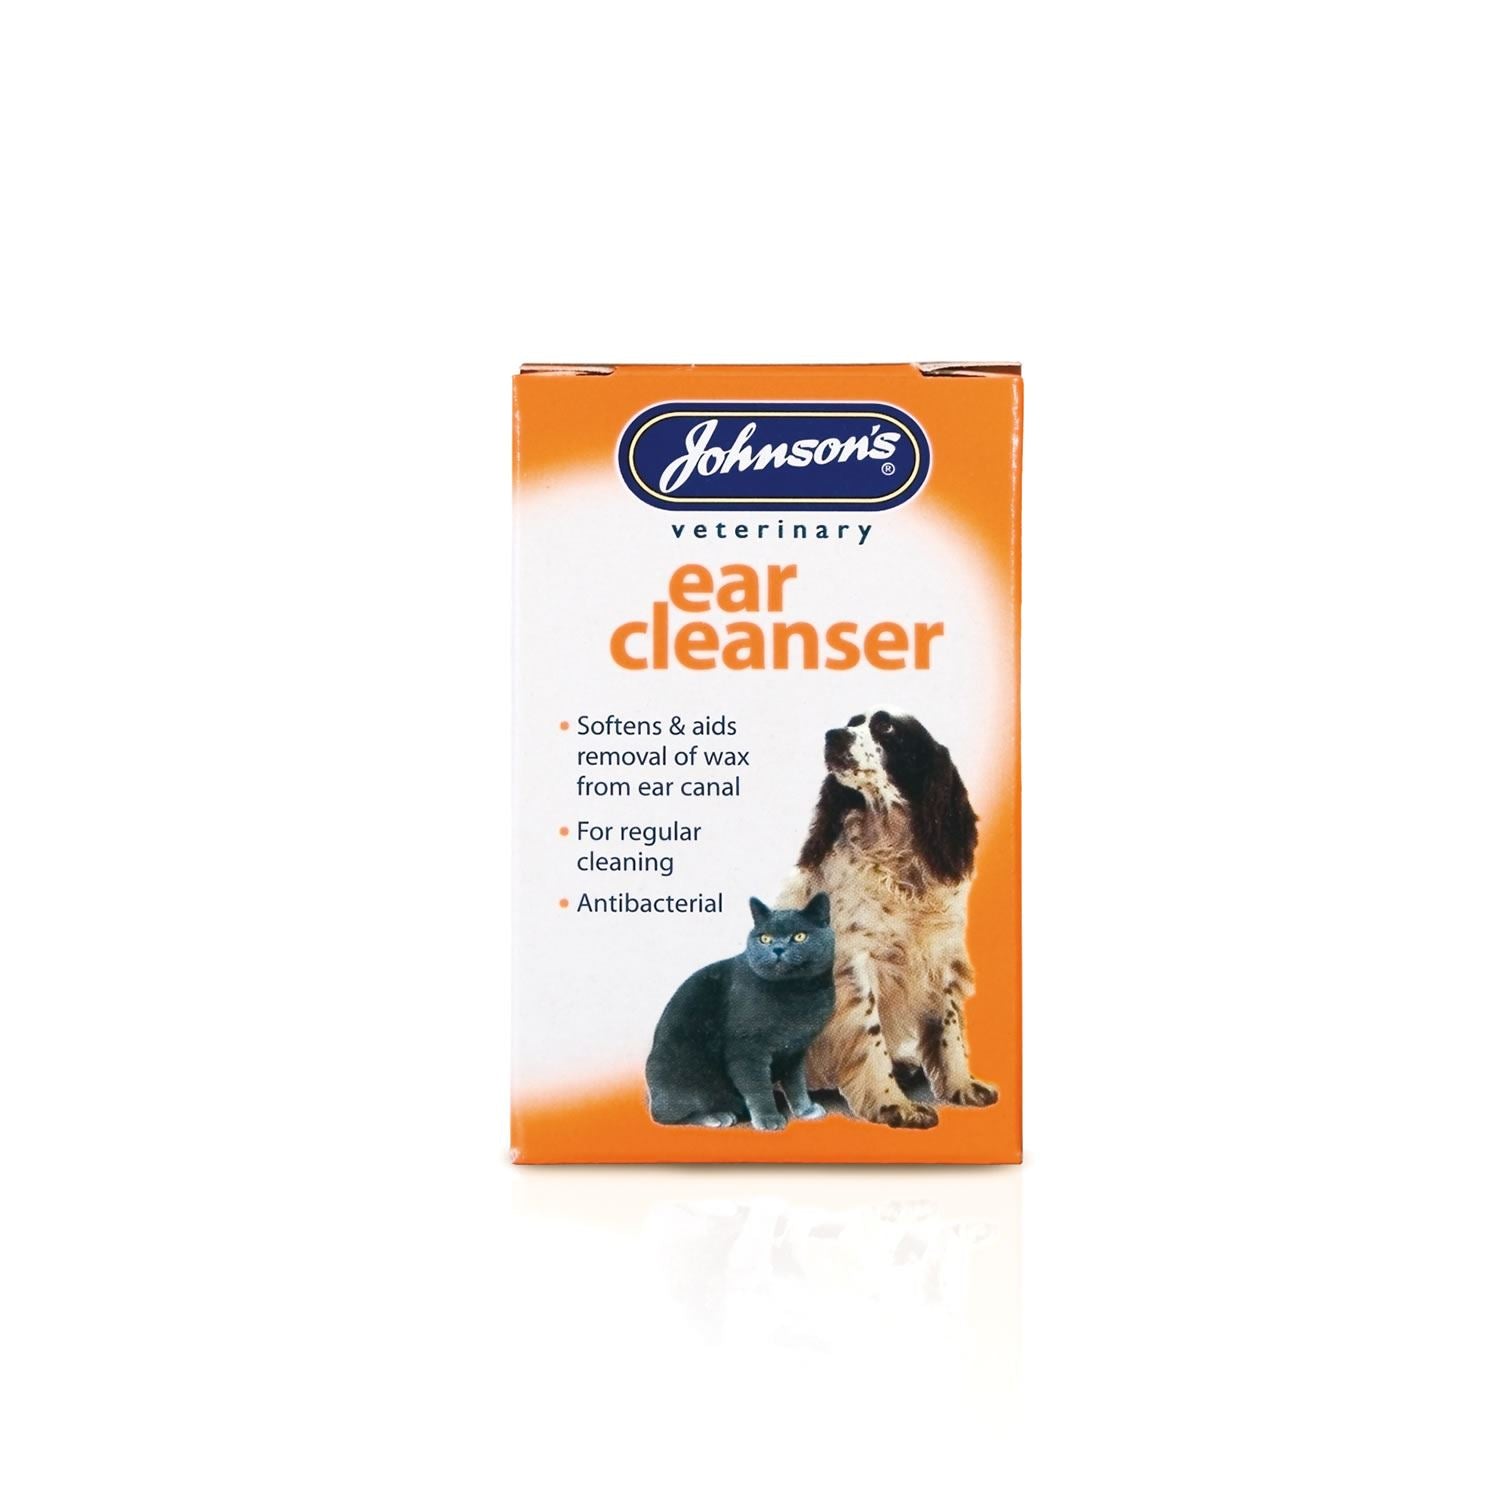 JohnsonS Veterinary Ear Cleanser - Just Horse Riders